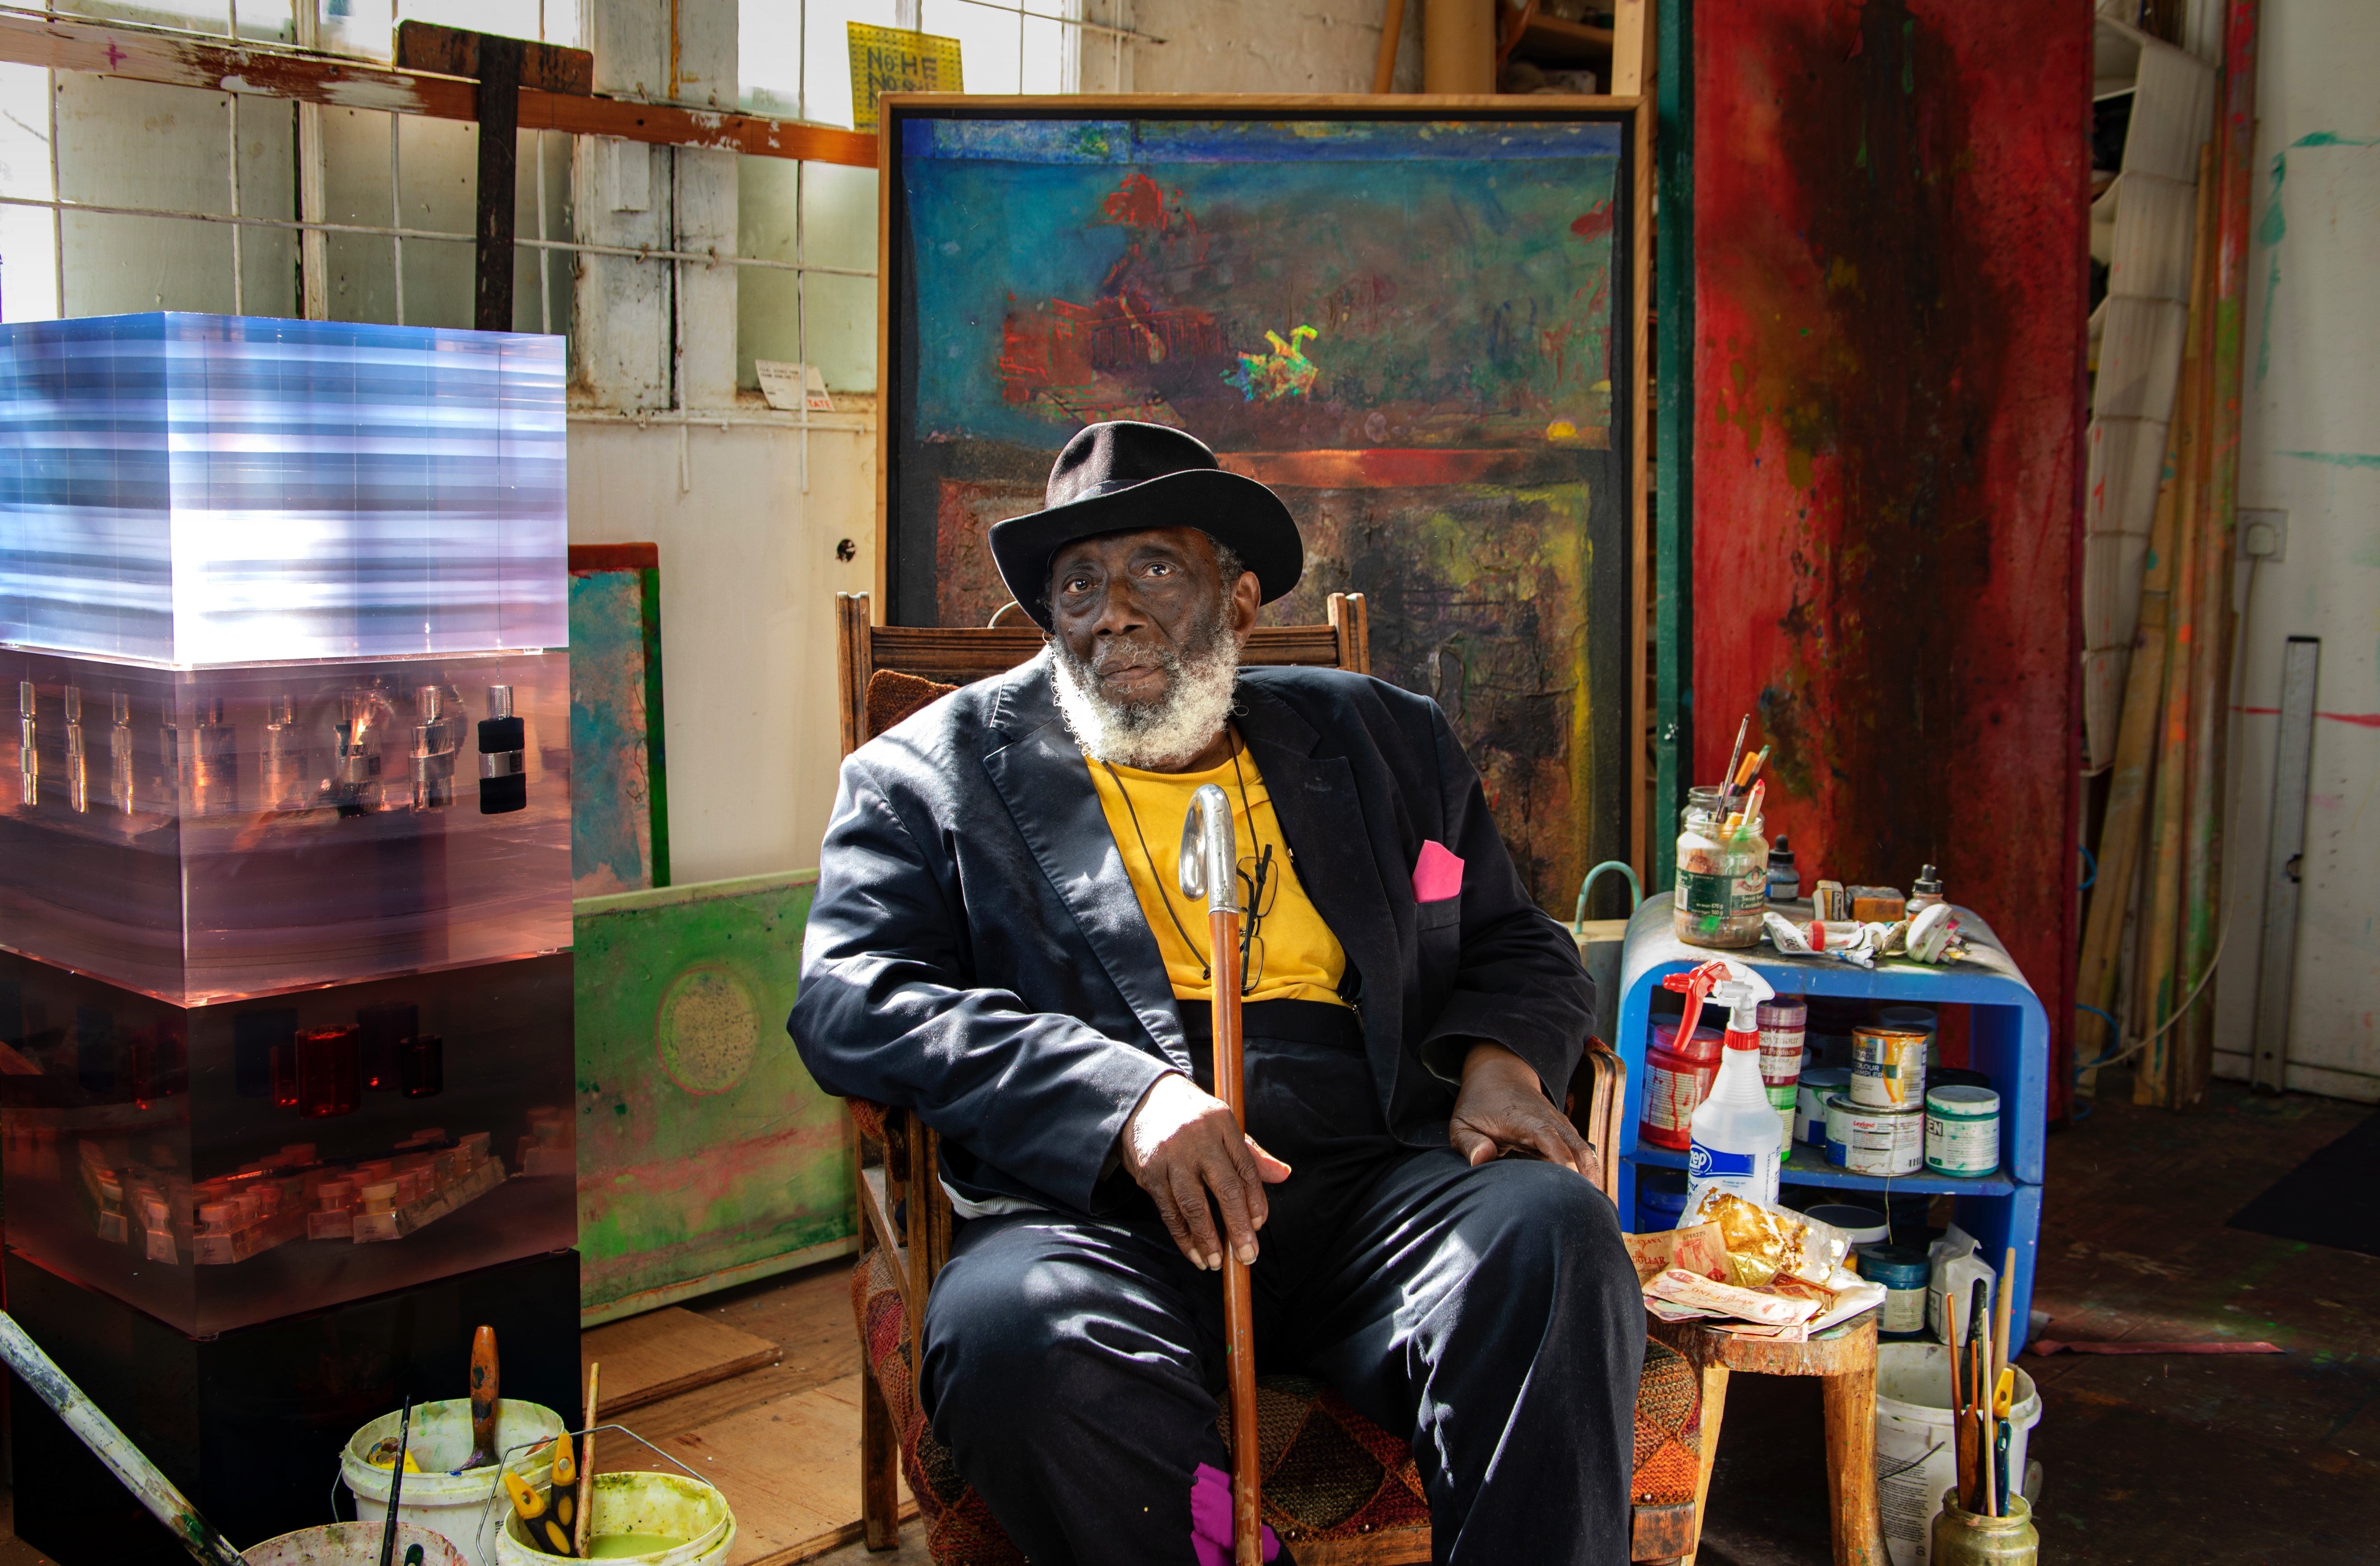 Undated handout photo of Frank Bowling who has been awarded a Knighthood for services to art in the Queen’s Birthday Honours List.